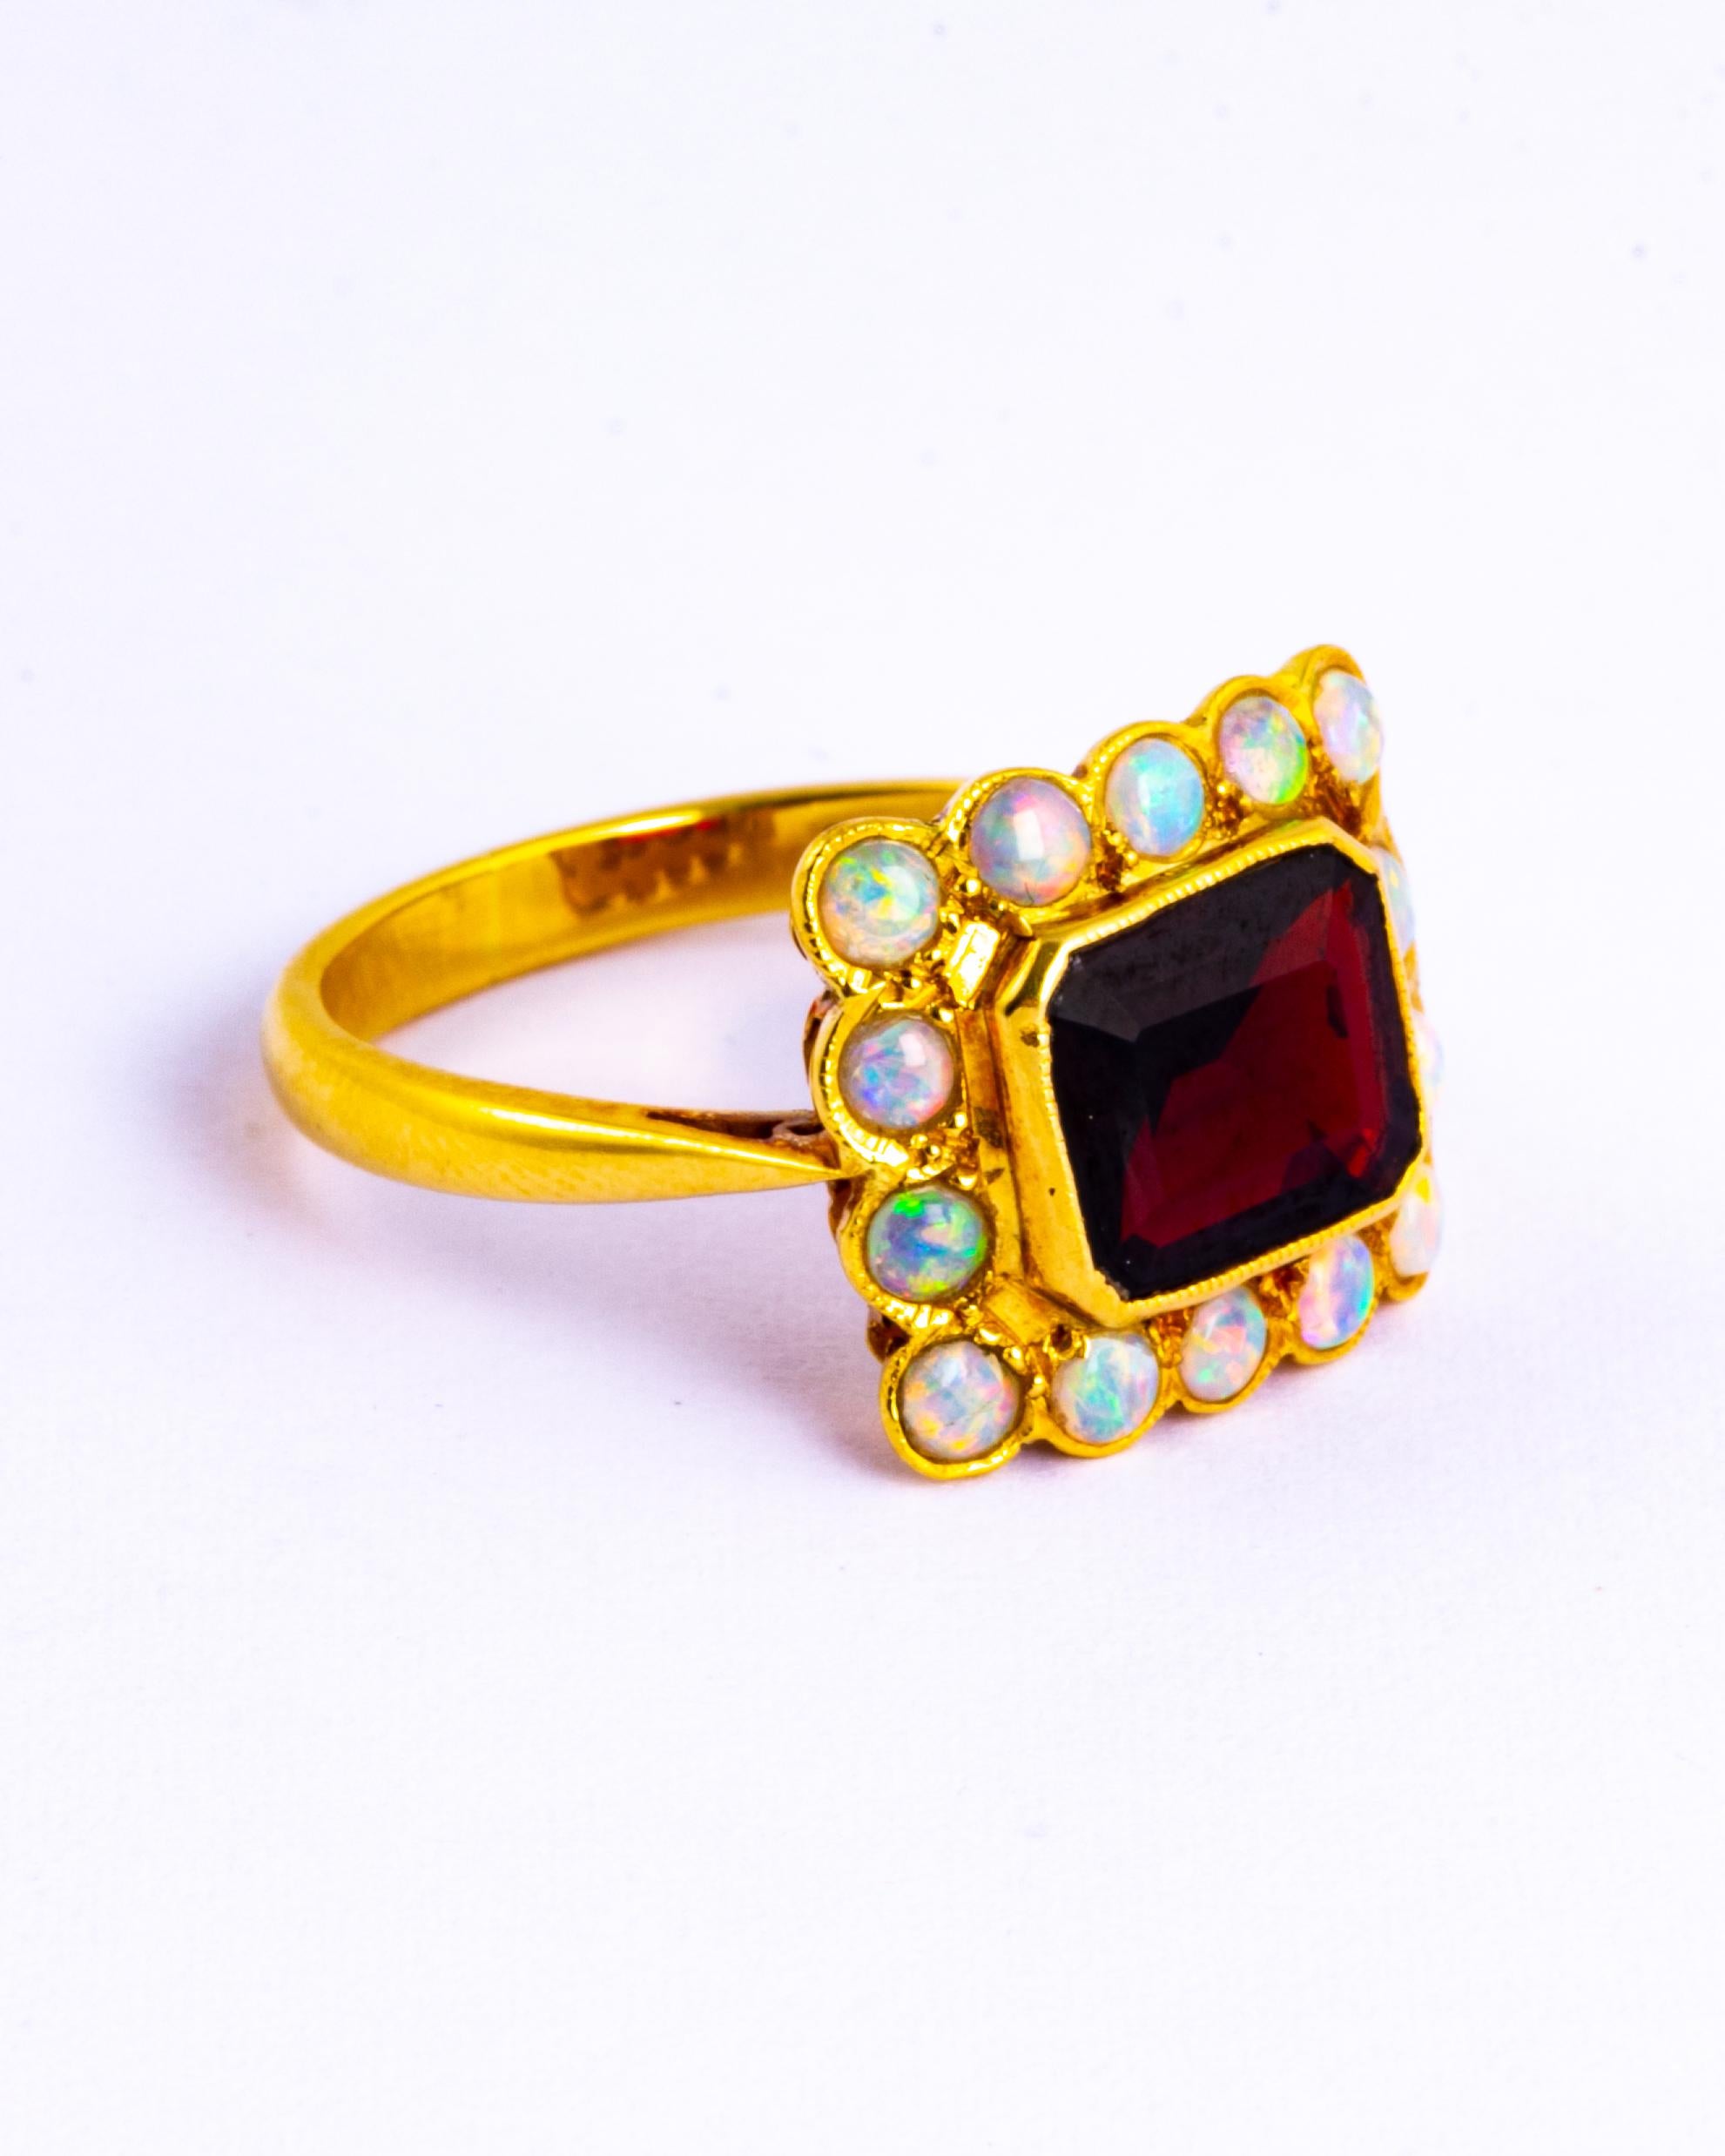 This striking ring holds an emerald cut garnet measuring approx 2carats and surrounding it are 14 shimmering opals. All the stones sit flush within the 18ct gold. Made in Chester, England. 

Ring Size: R 1/2 or 9
Panel Dimensions: 14x16mm

Weight: